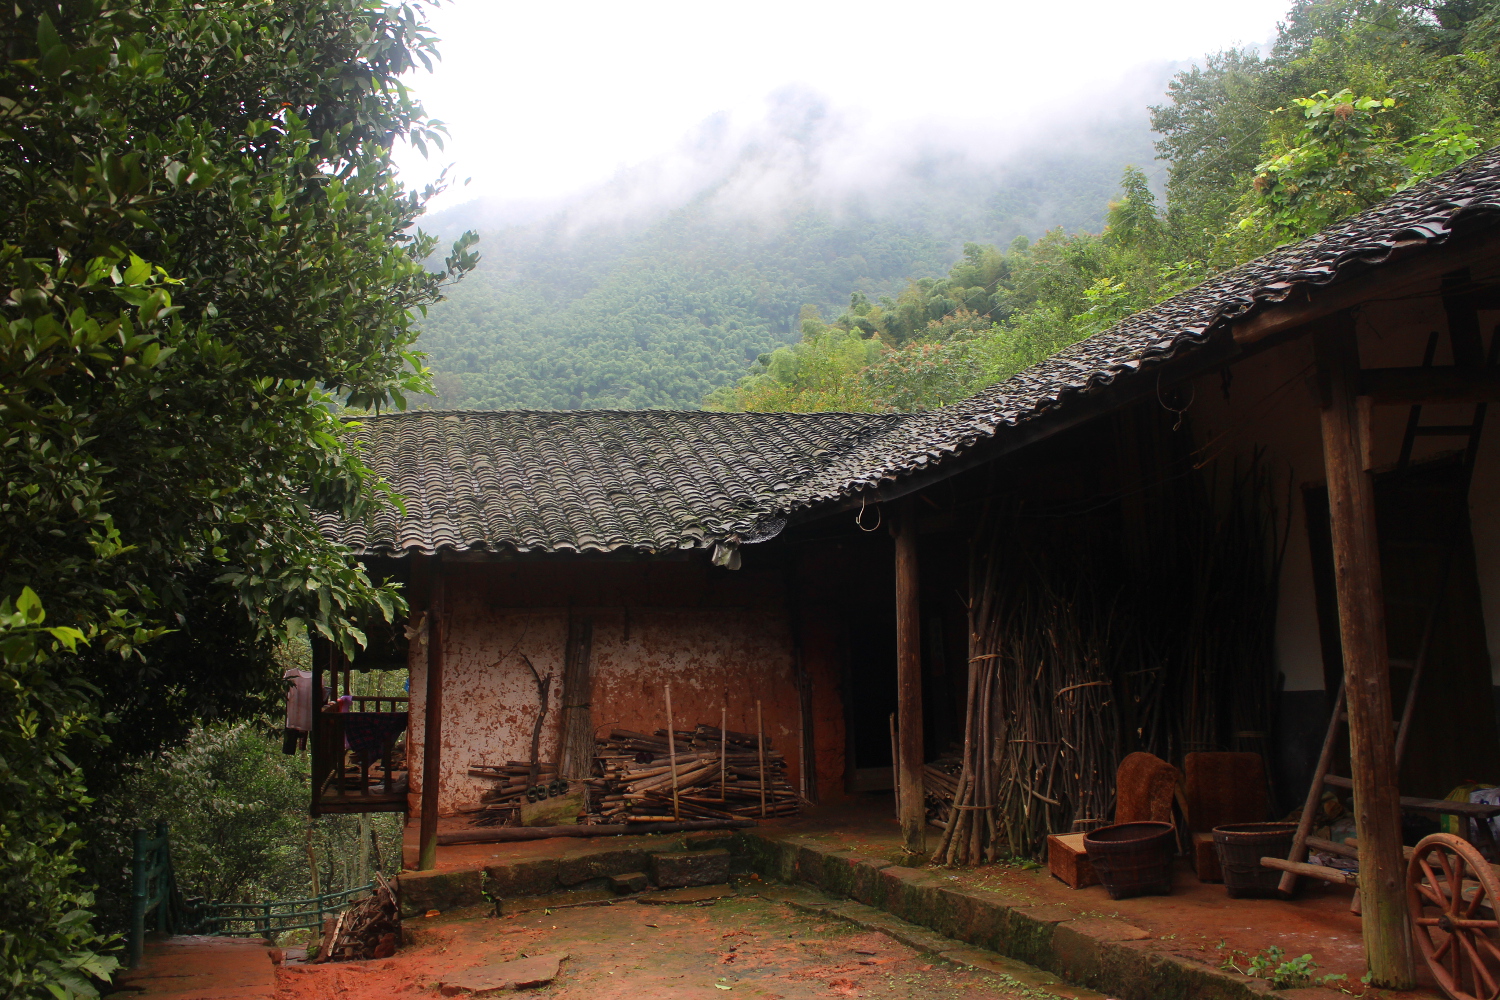 Ancient farmhouses around Chishui recall simpler times in China's history. Image by Thomas Bird / londoninfopage